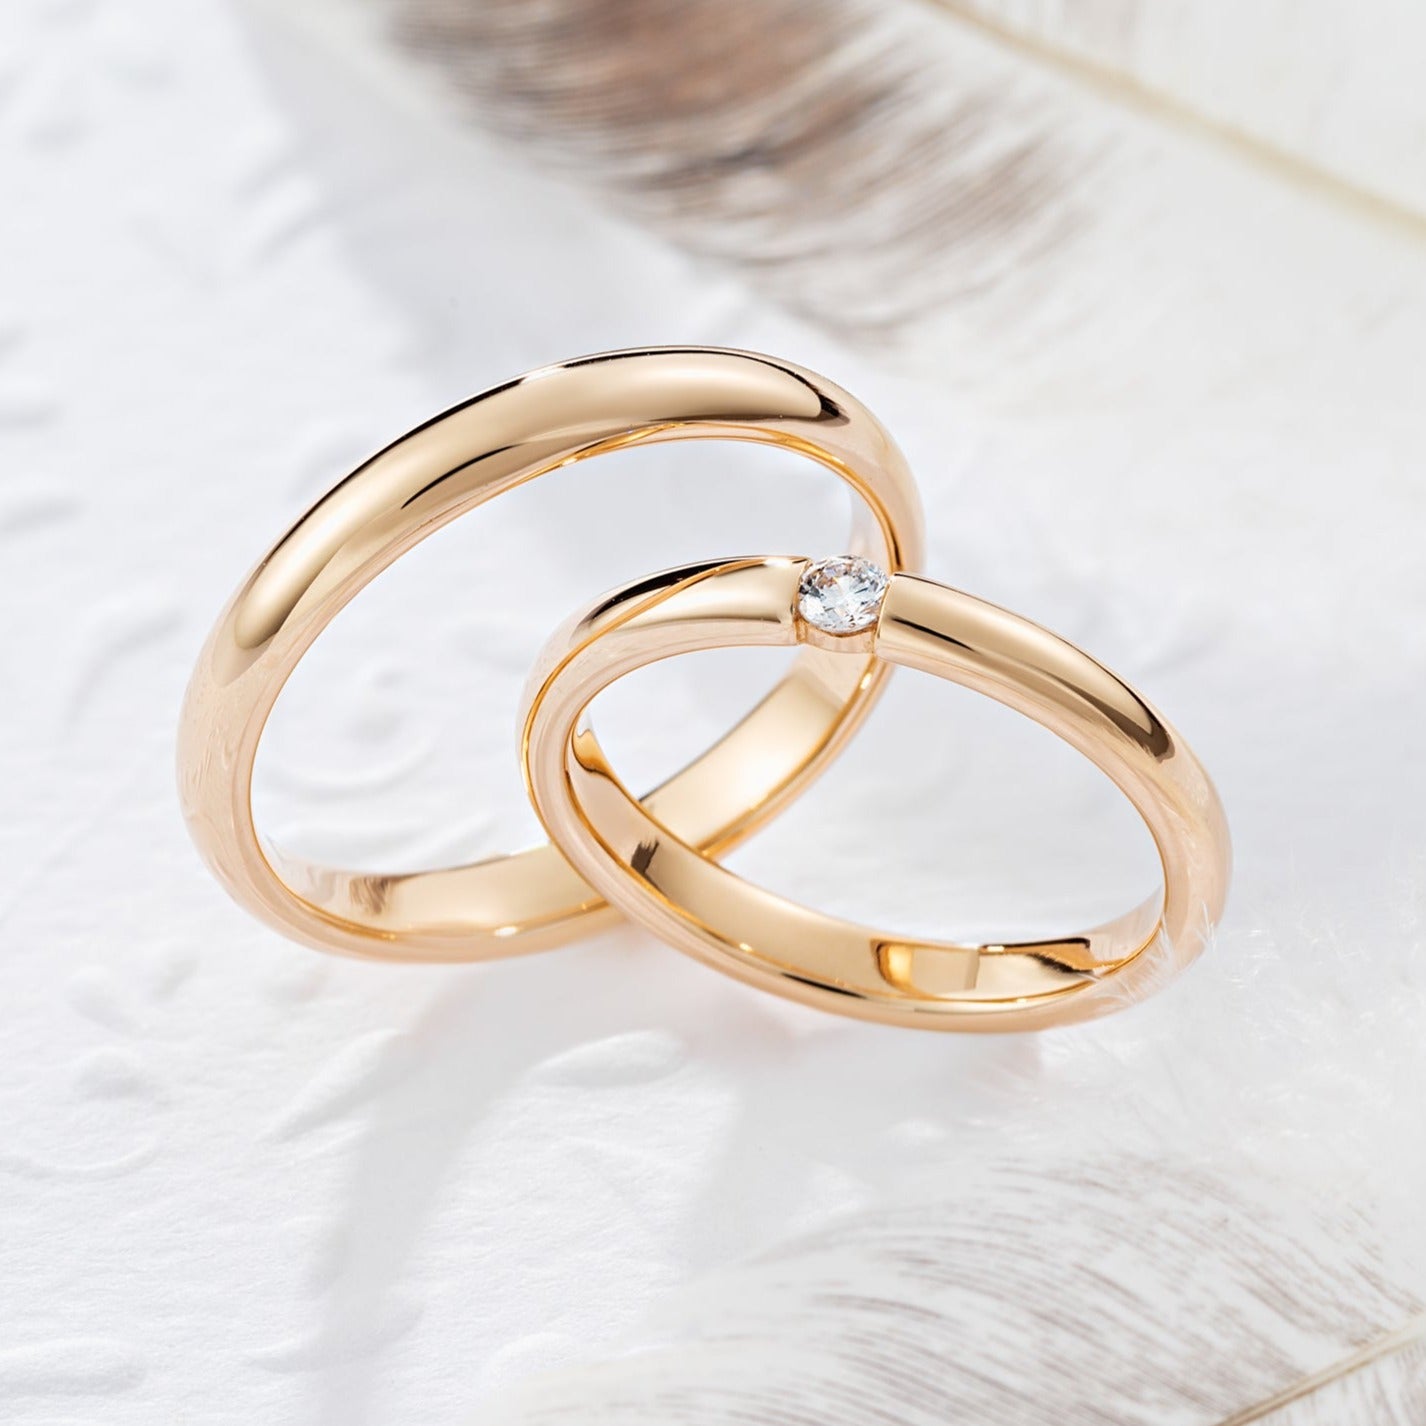 Simple gold wedding rings with diamond in her ring. Classic wedding bands. Gold wedding bands set. His and hers wedding rings. Couple rings. Classic wedding bands set